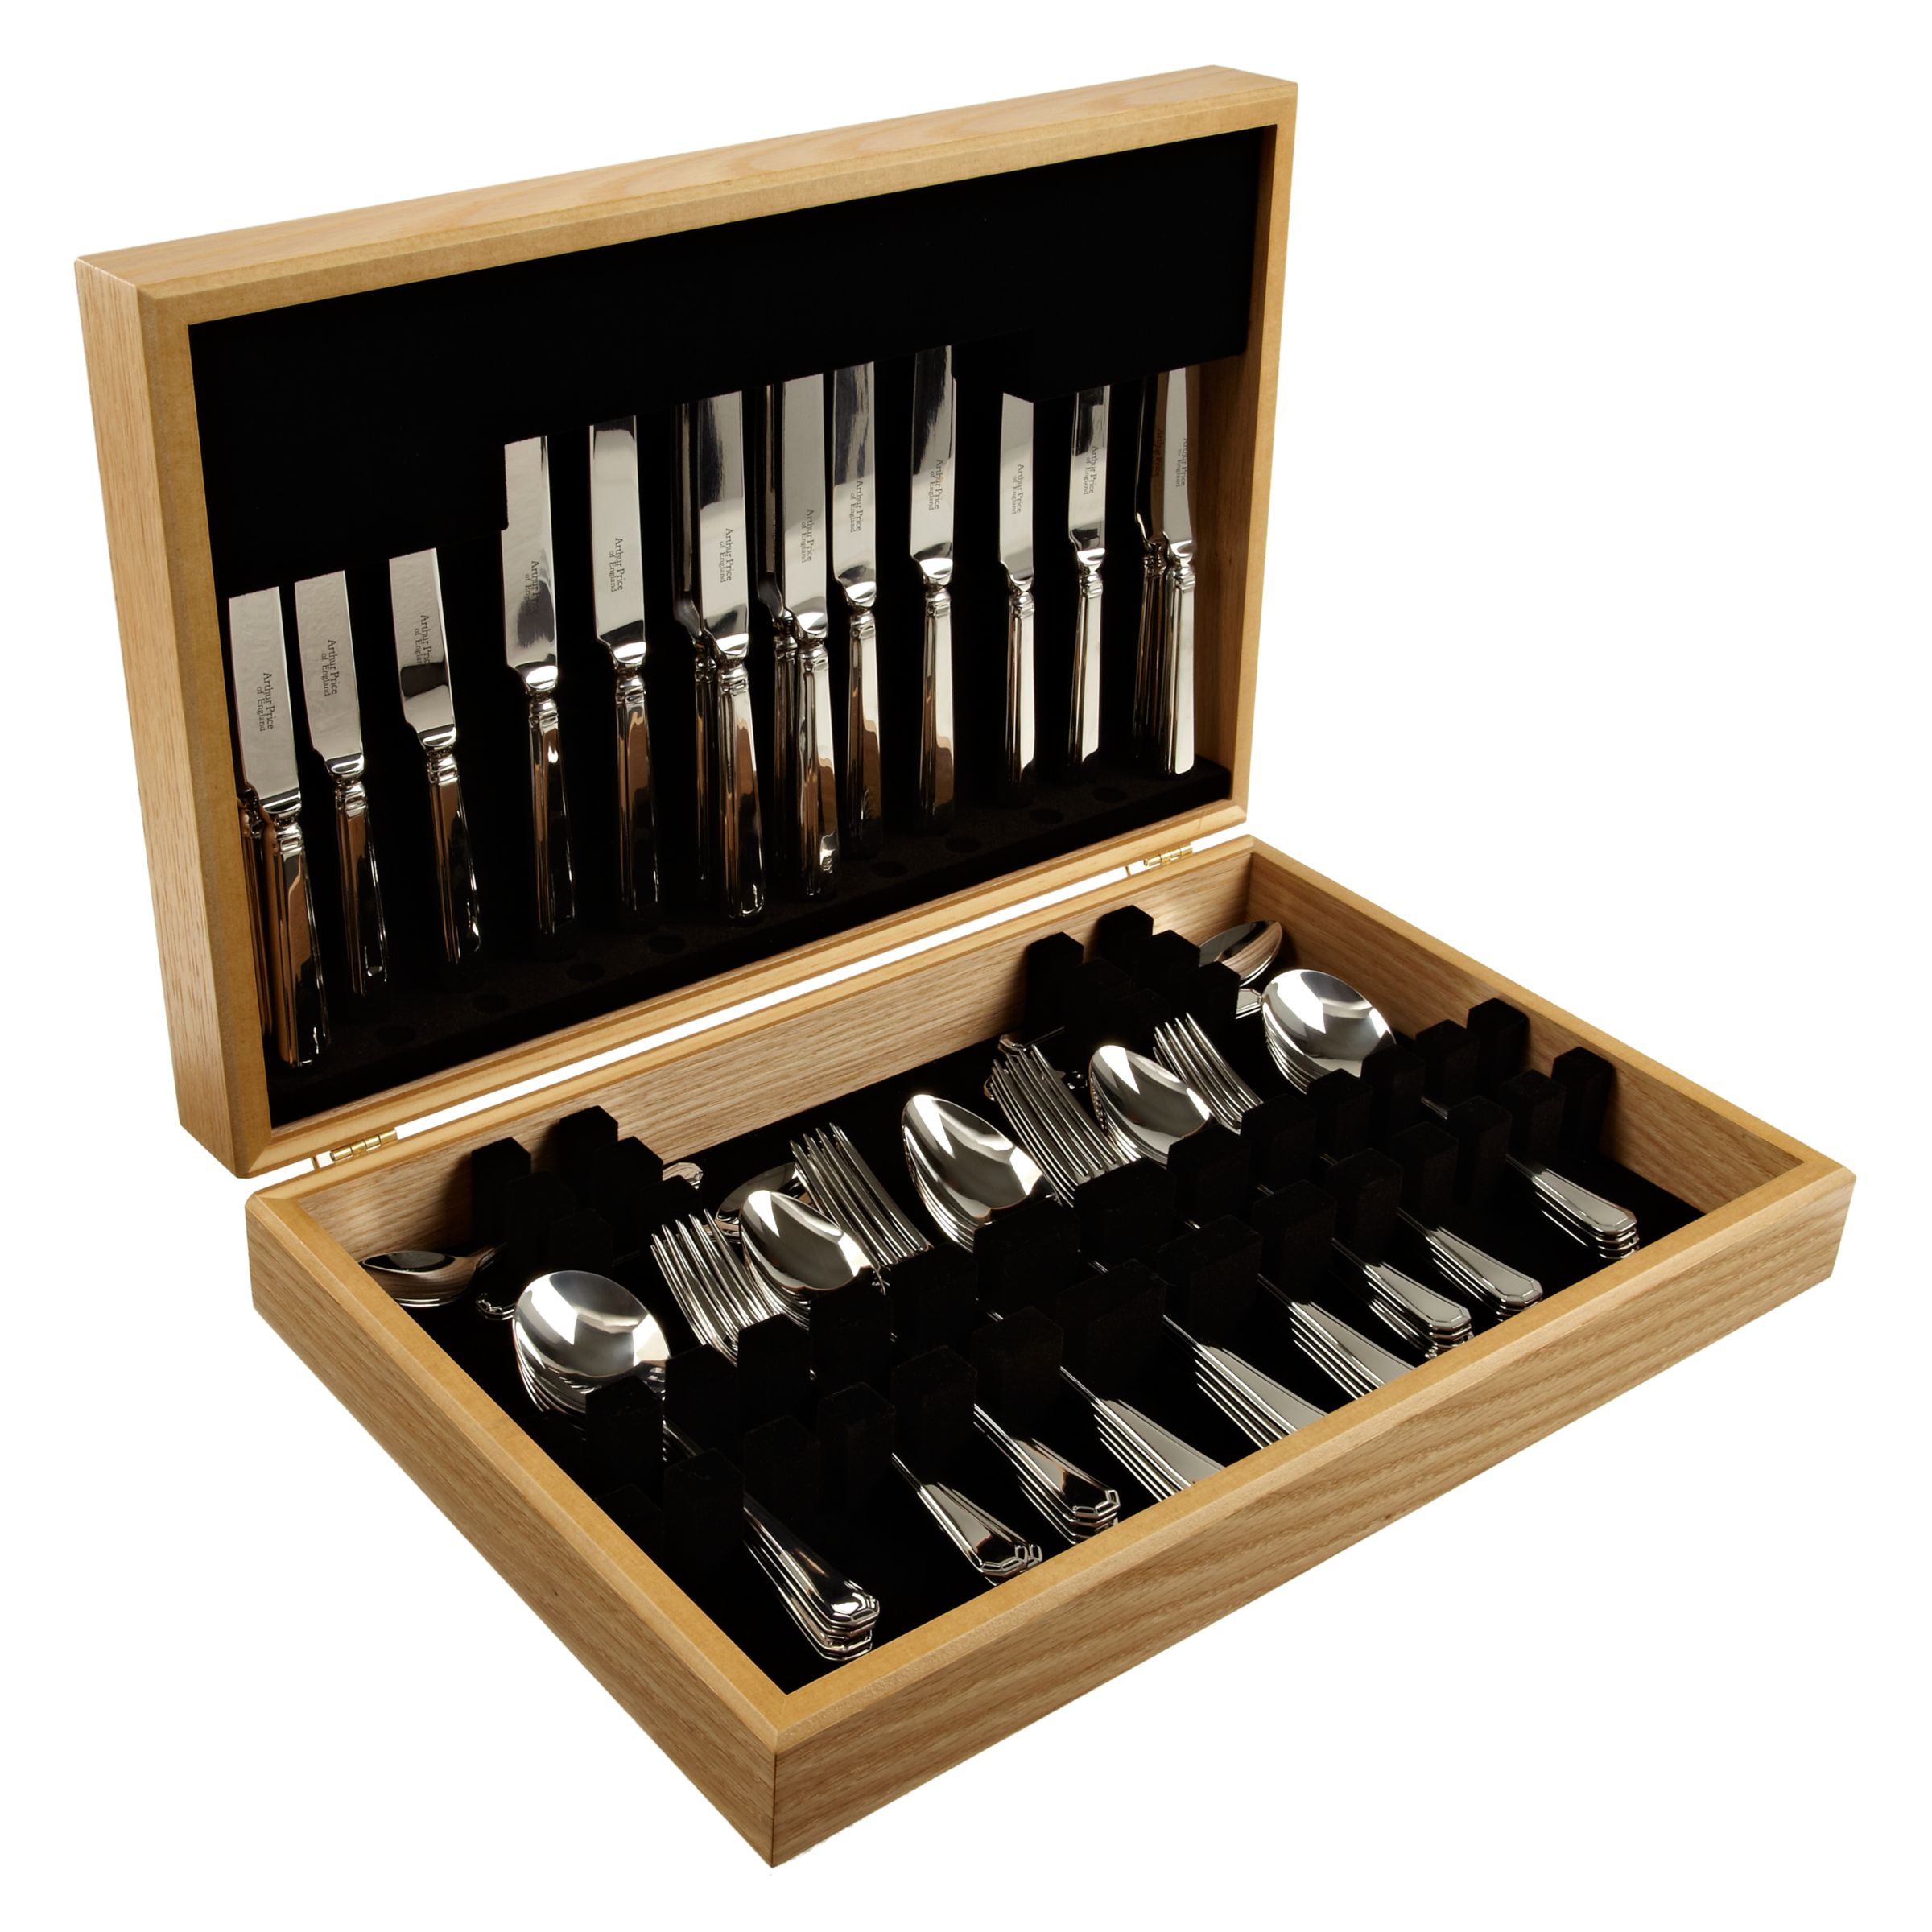 Arthur Price Grecian Cutlery Canteen, Stainless Steel, 60-Piece at John Lewis